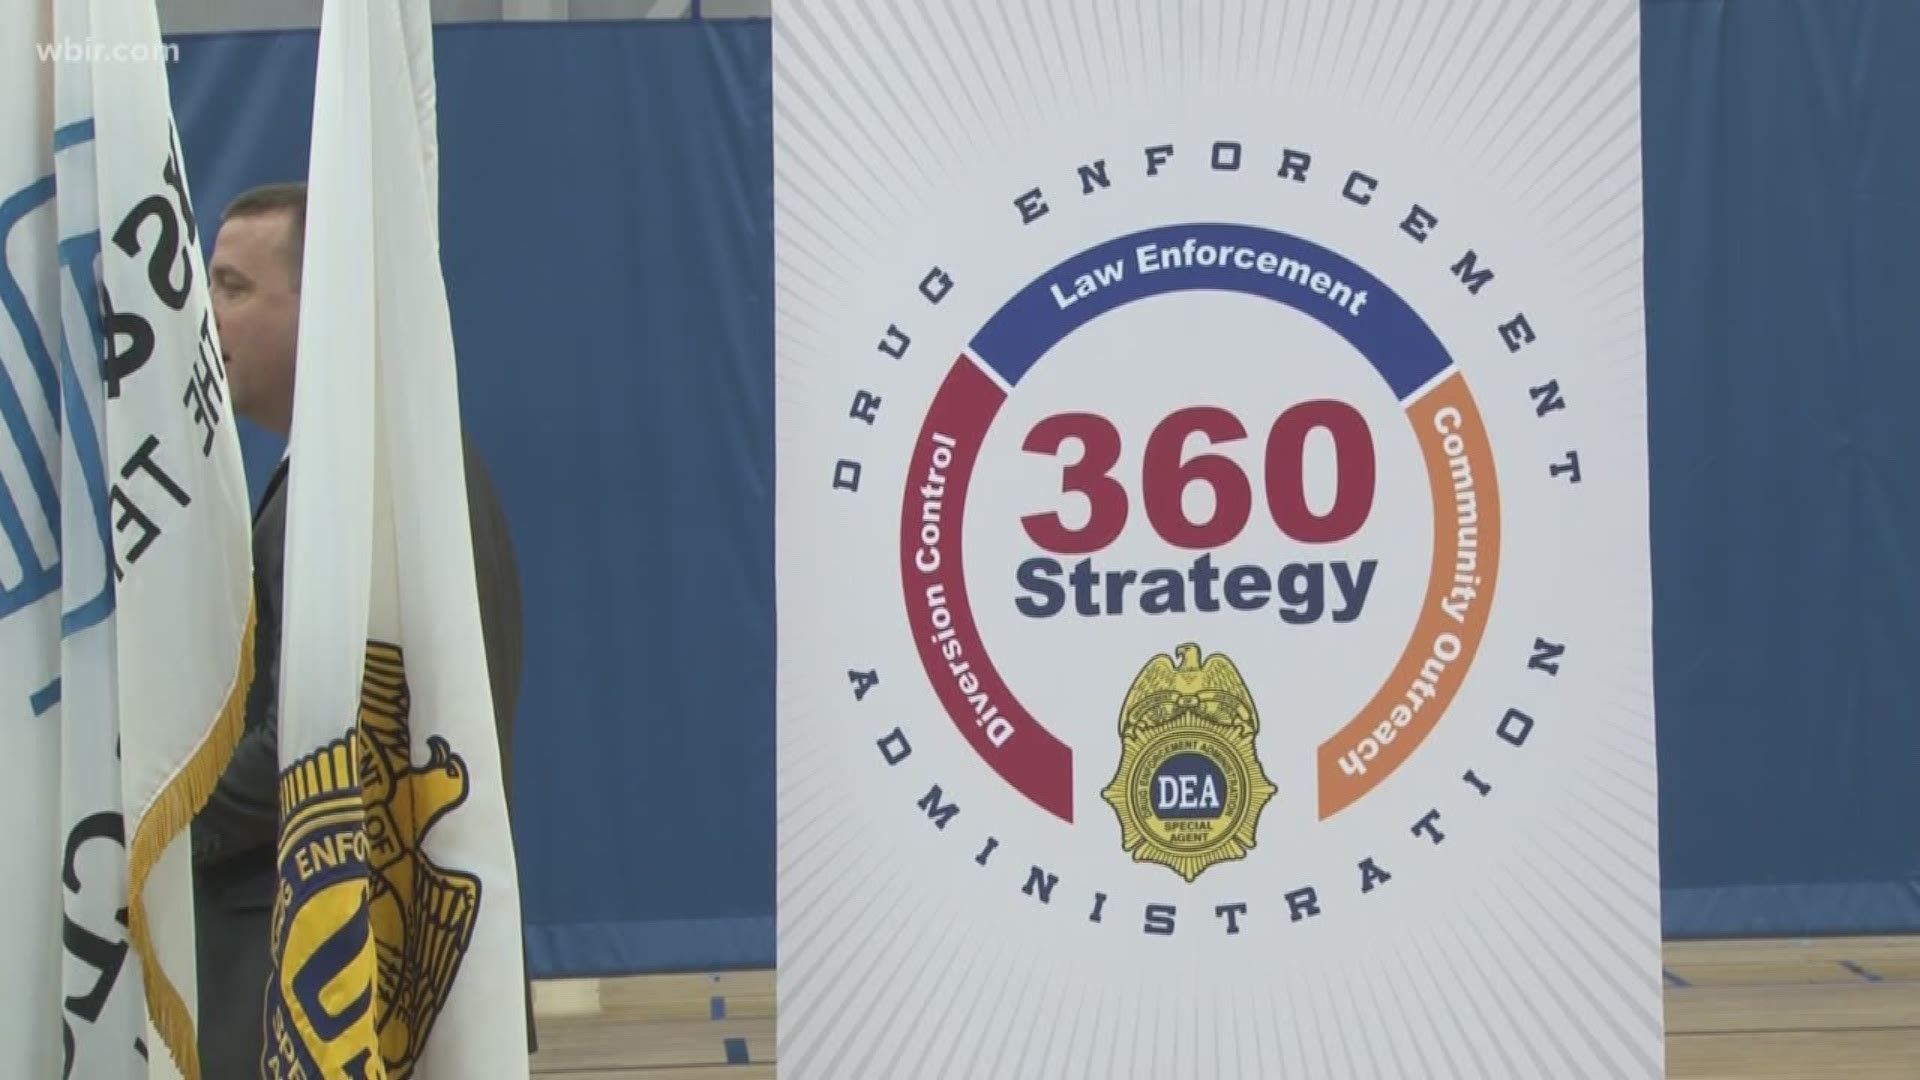 The program takes a comprehensive approach, merging traditional law enforcement tactics with community partnerships. 